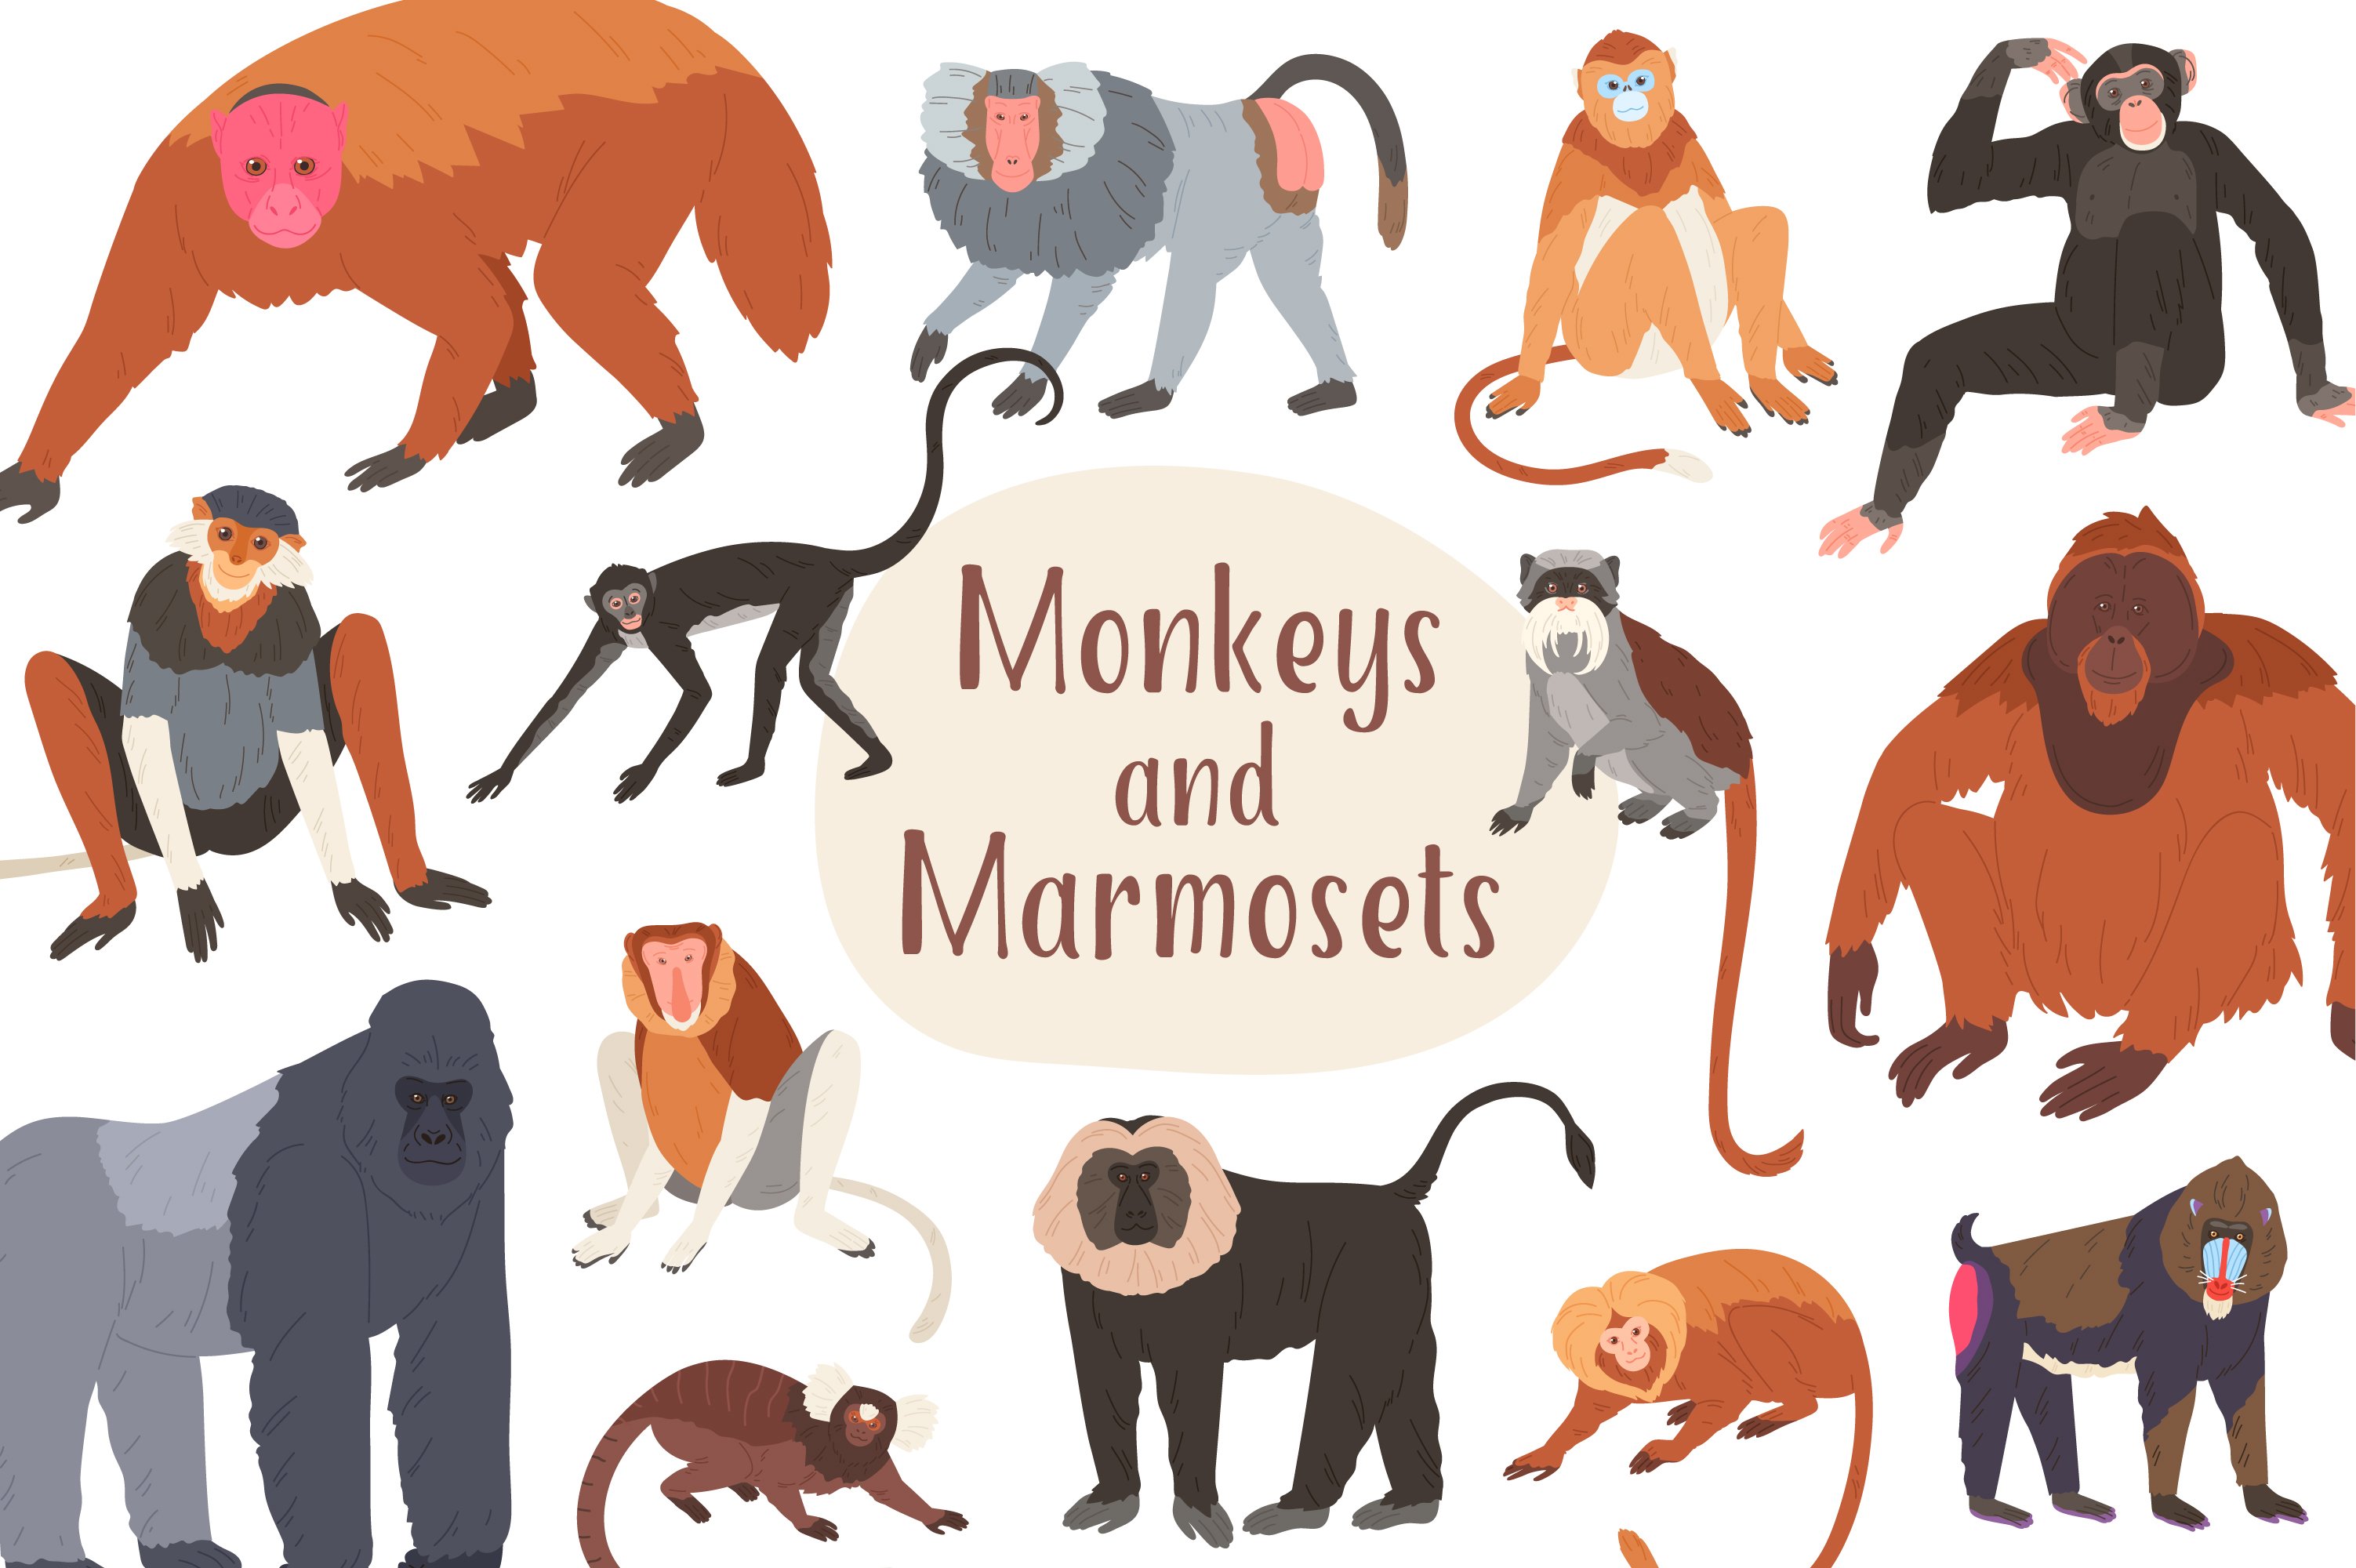 Monkey and marmoset collection cover image.